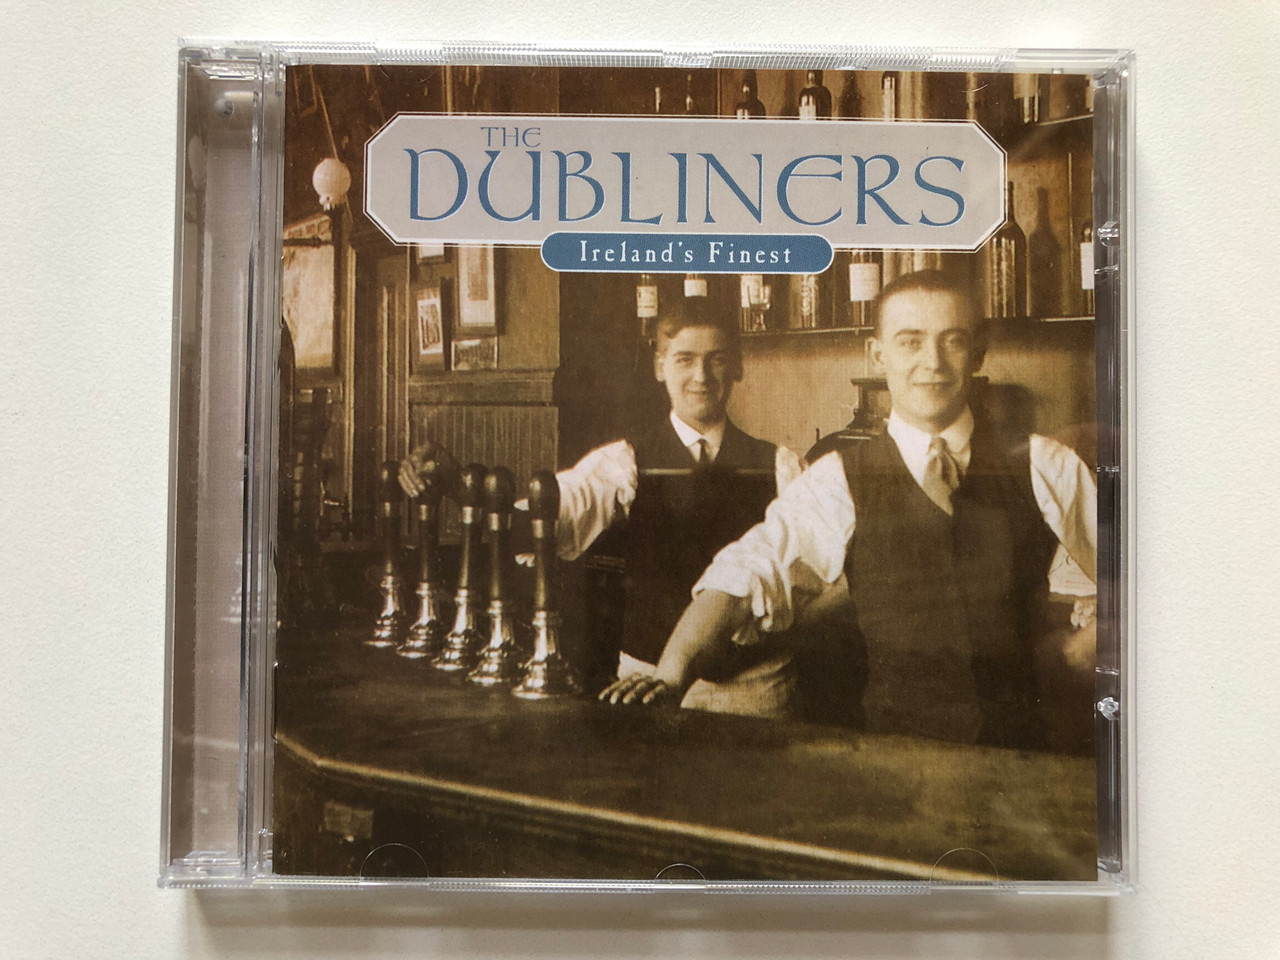 https://cdn10.bigcommerce.com/s-62bdpkt7pb/products/0/images/313297/The_Dubliners_Irelands_Finest_Castle_Select_Audio_CD_1998_SELCD_536_1__54557.1700664933.1280.1280.JPG?c=2